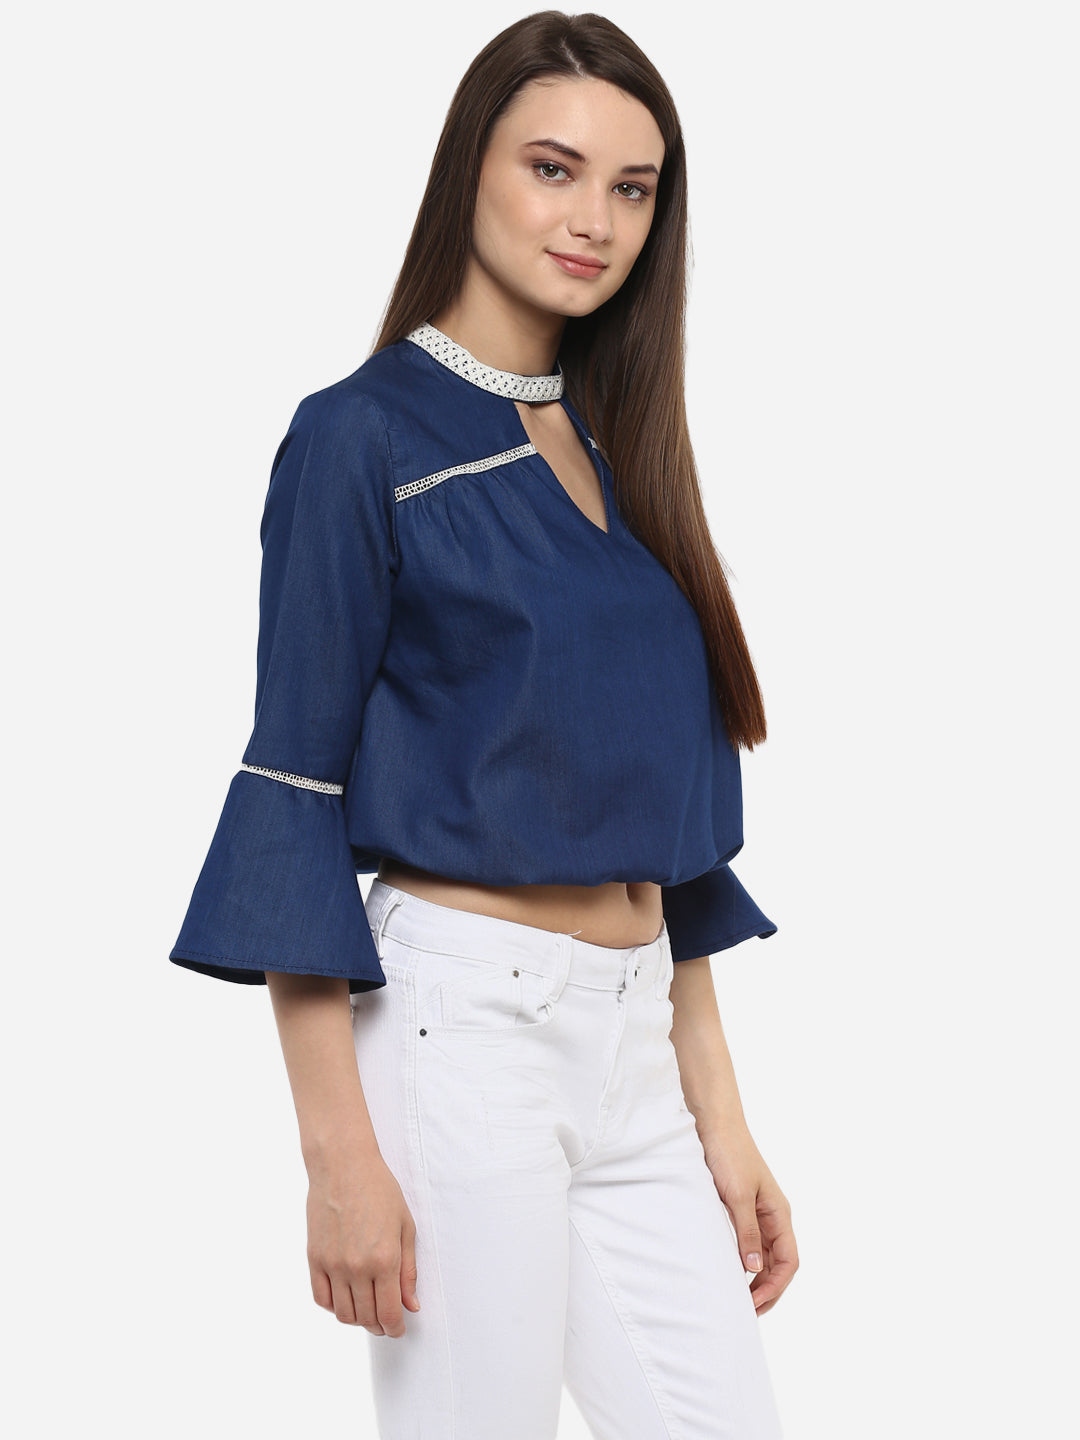 Women's Denim peasant top with Lace detailing